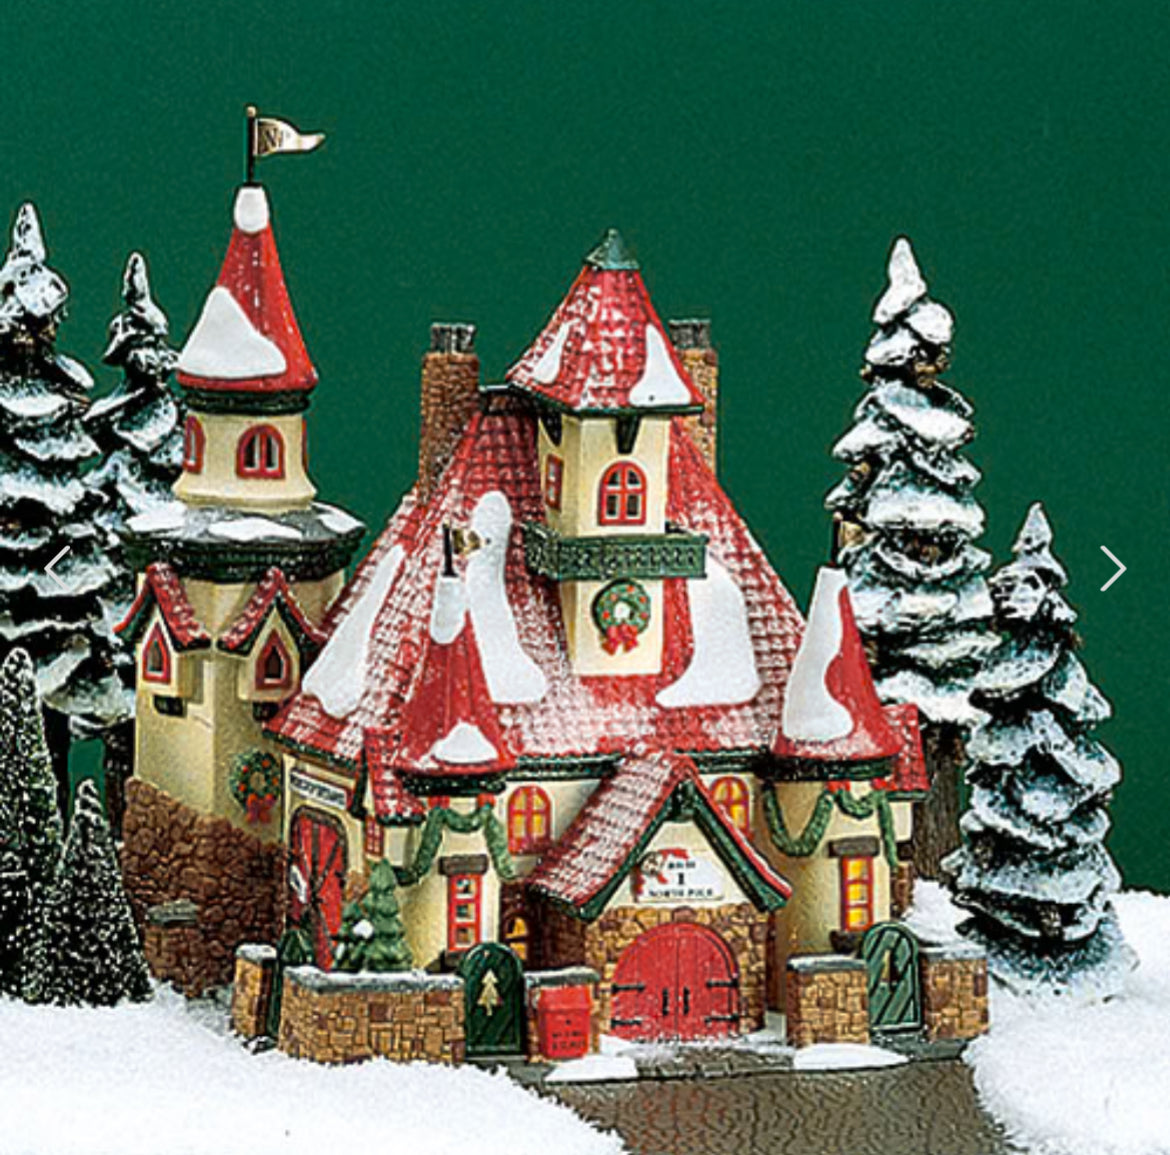 Department 56 - Heritage Village - Route 1, North Pole - Home Of Mr. & Mrs. Claus